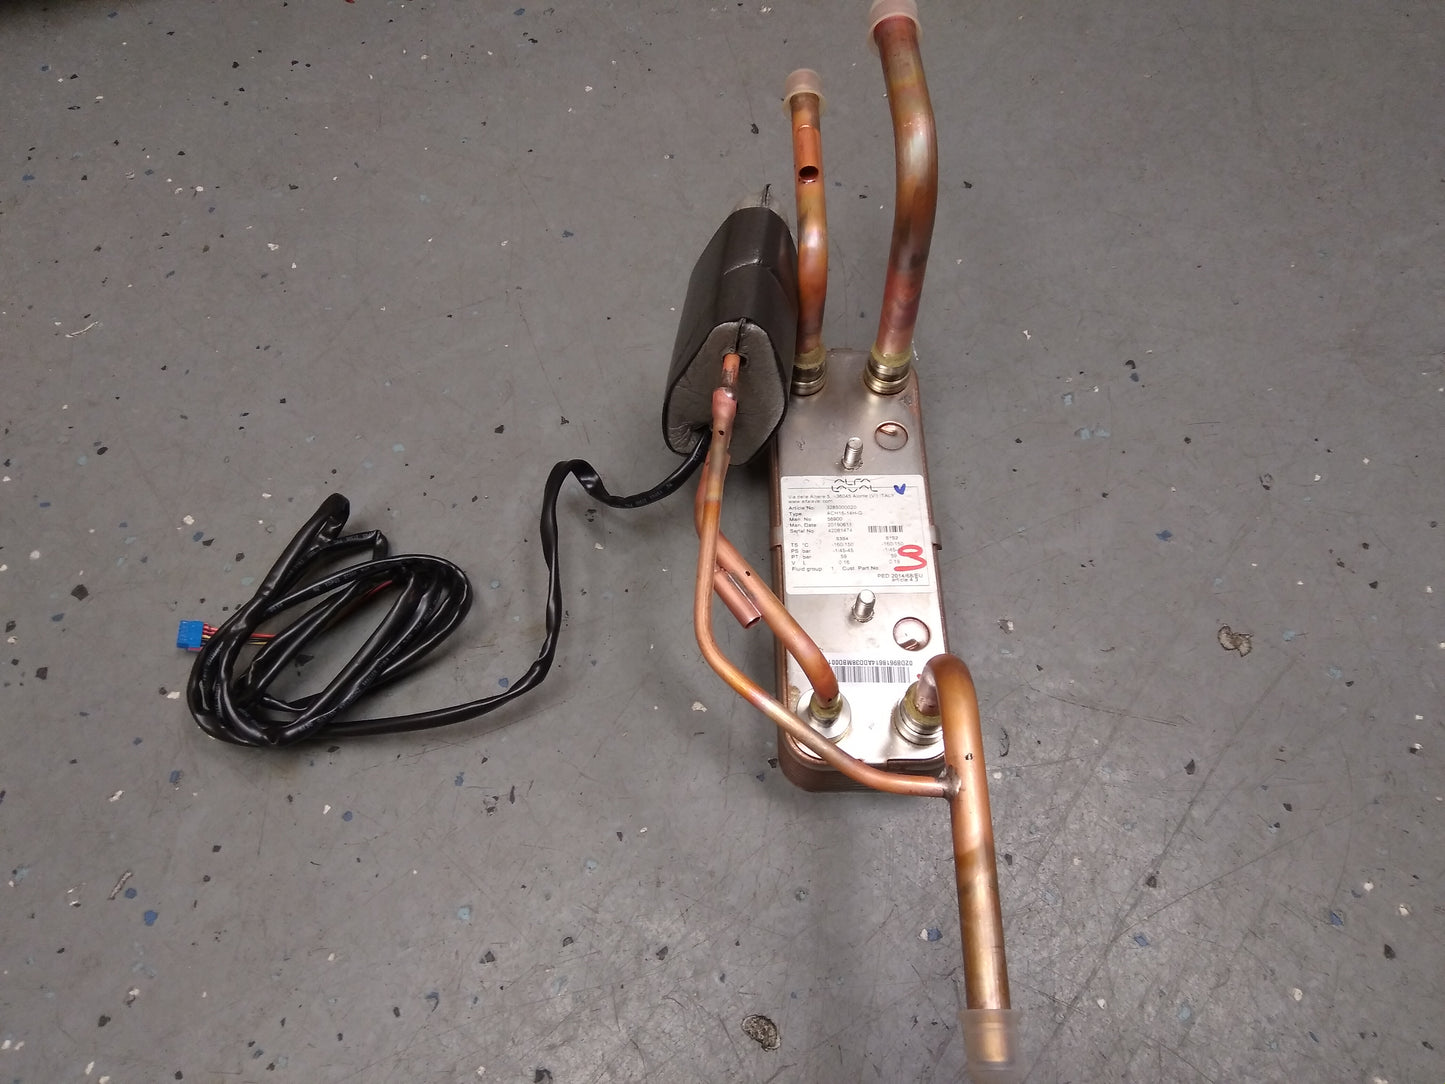 SUBCOOLER ASSEMBLY WITH 24V SOLENOID COIL